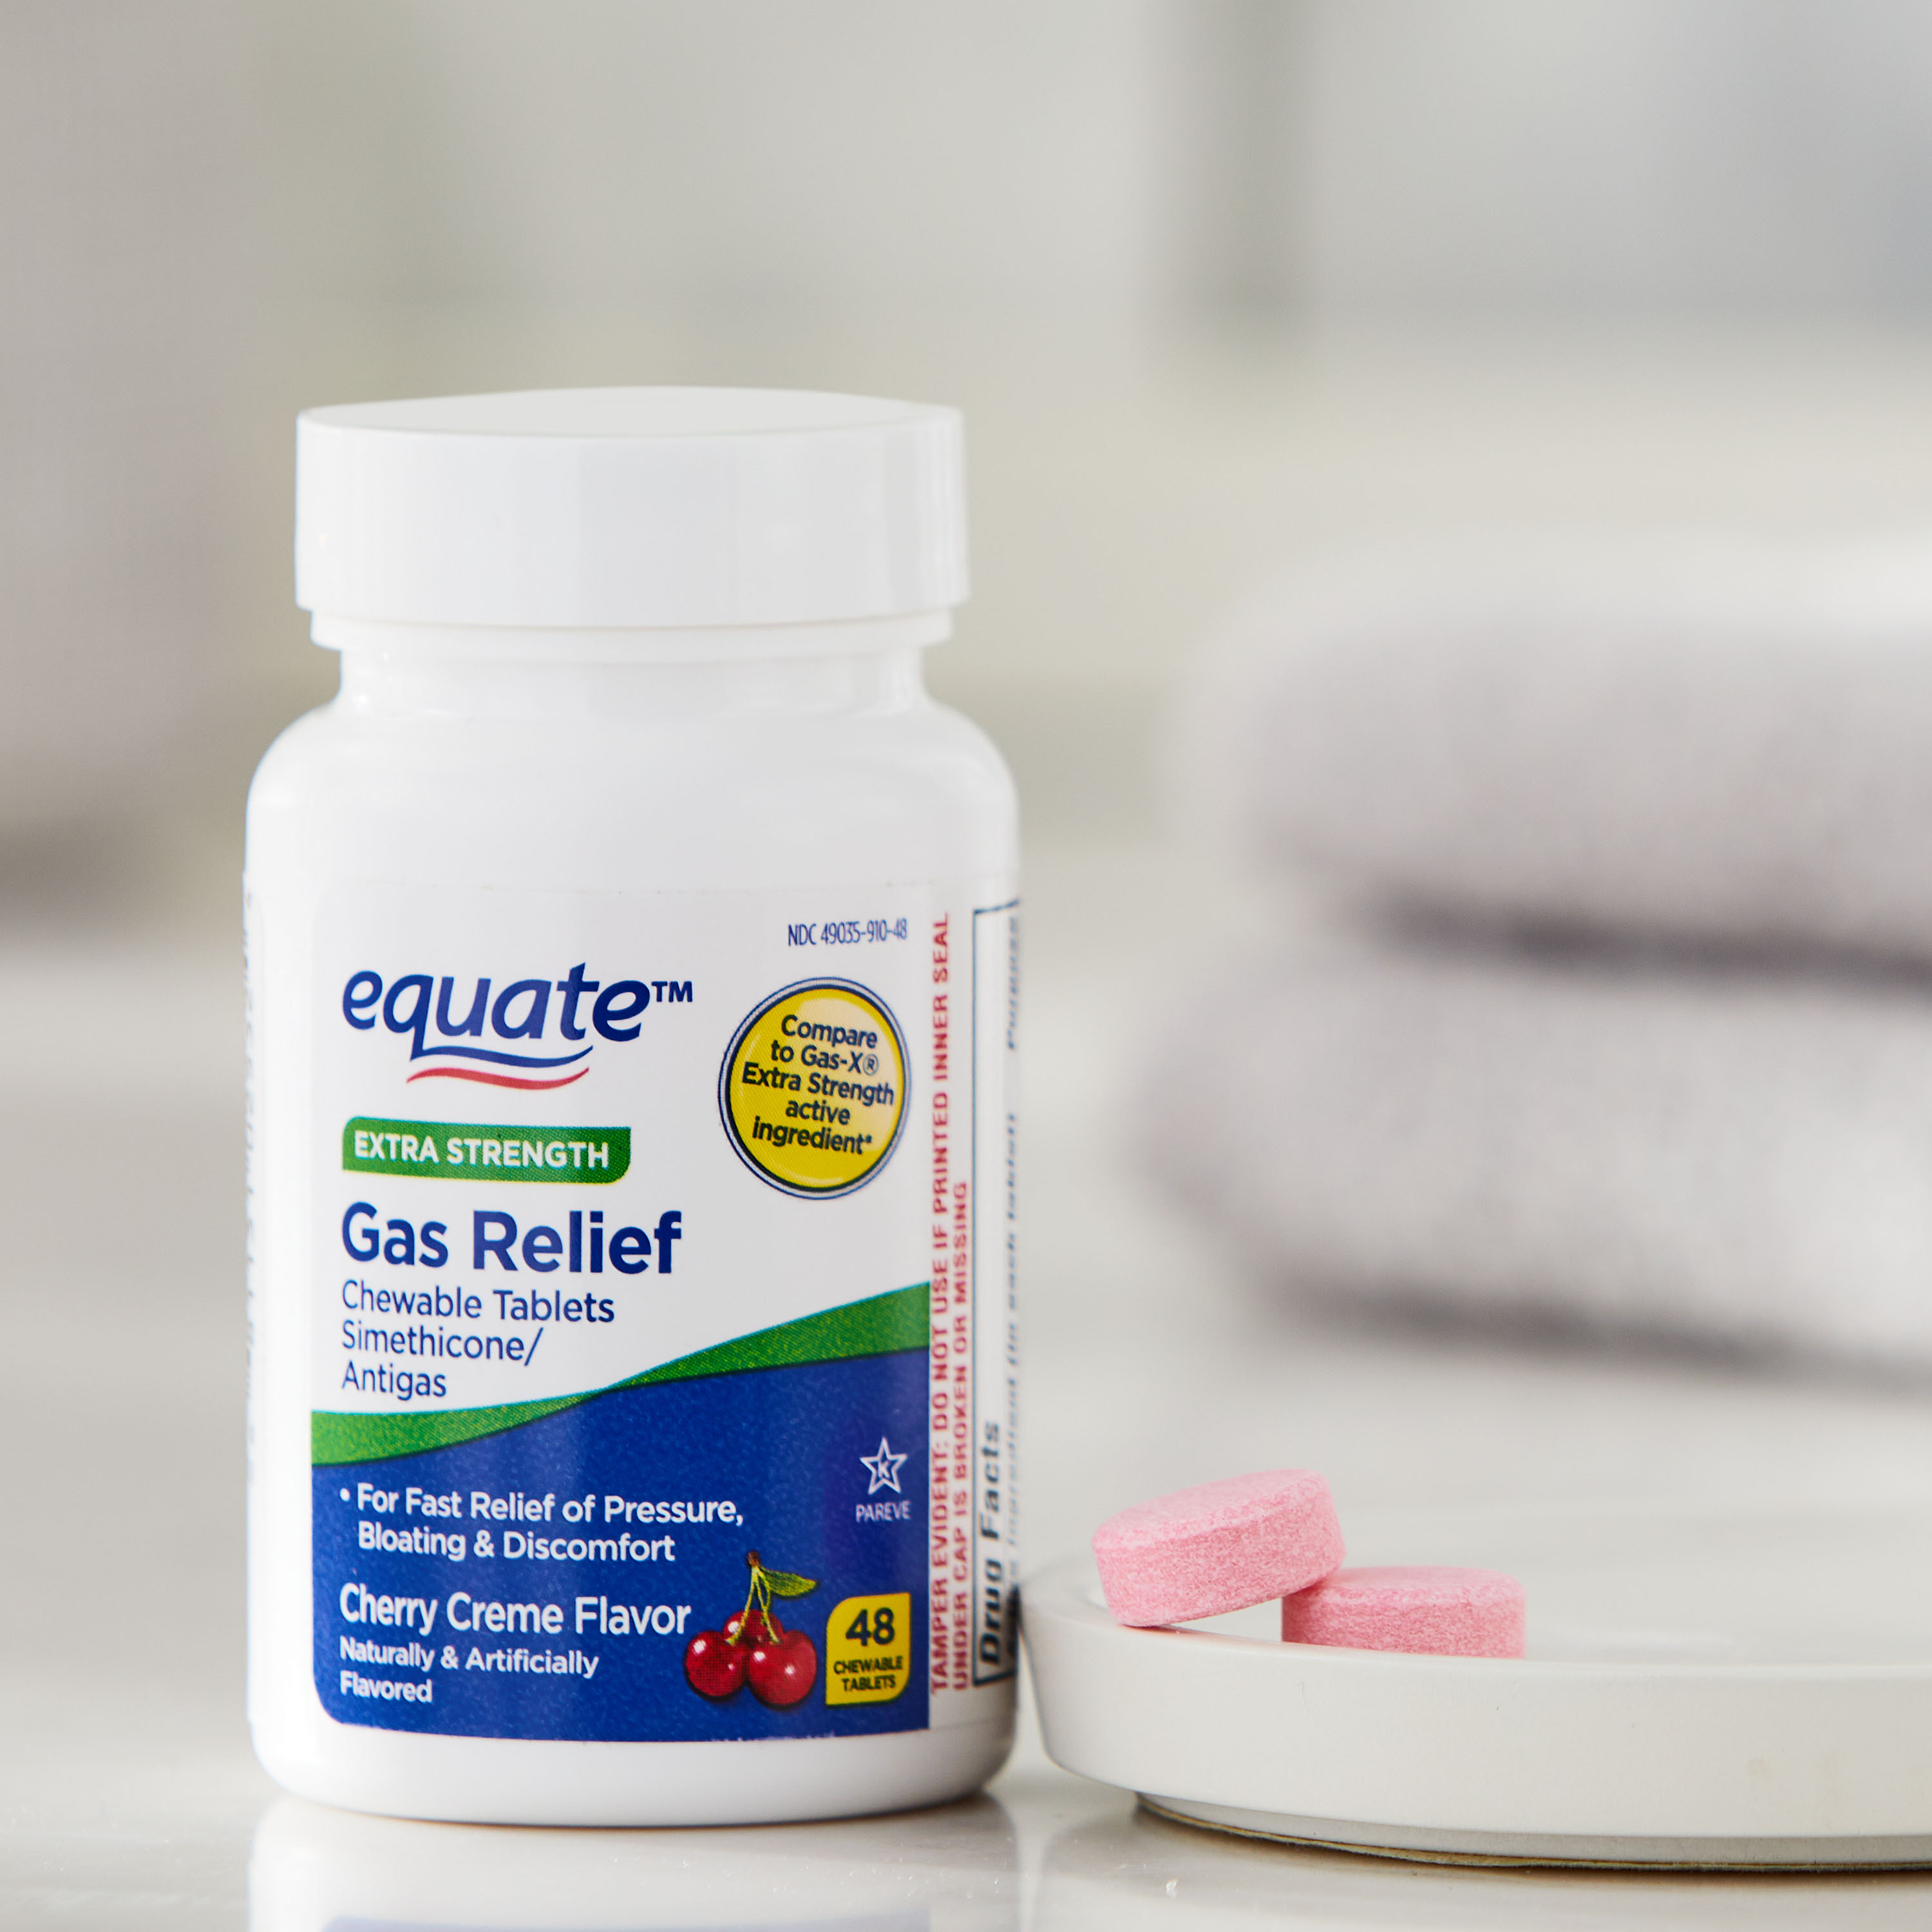 Equate Extra Strength Gas Relief Chewable Tablets, Cherry Creme, 48 Count - image 2 of 13